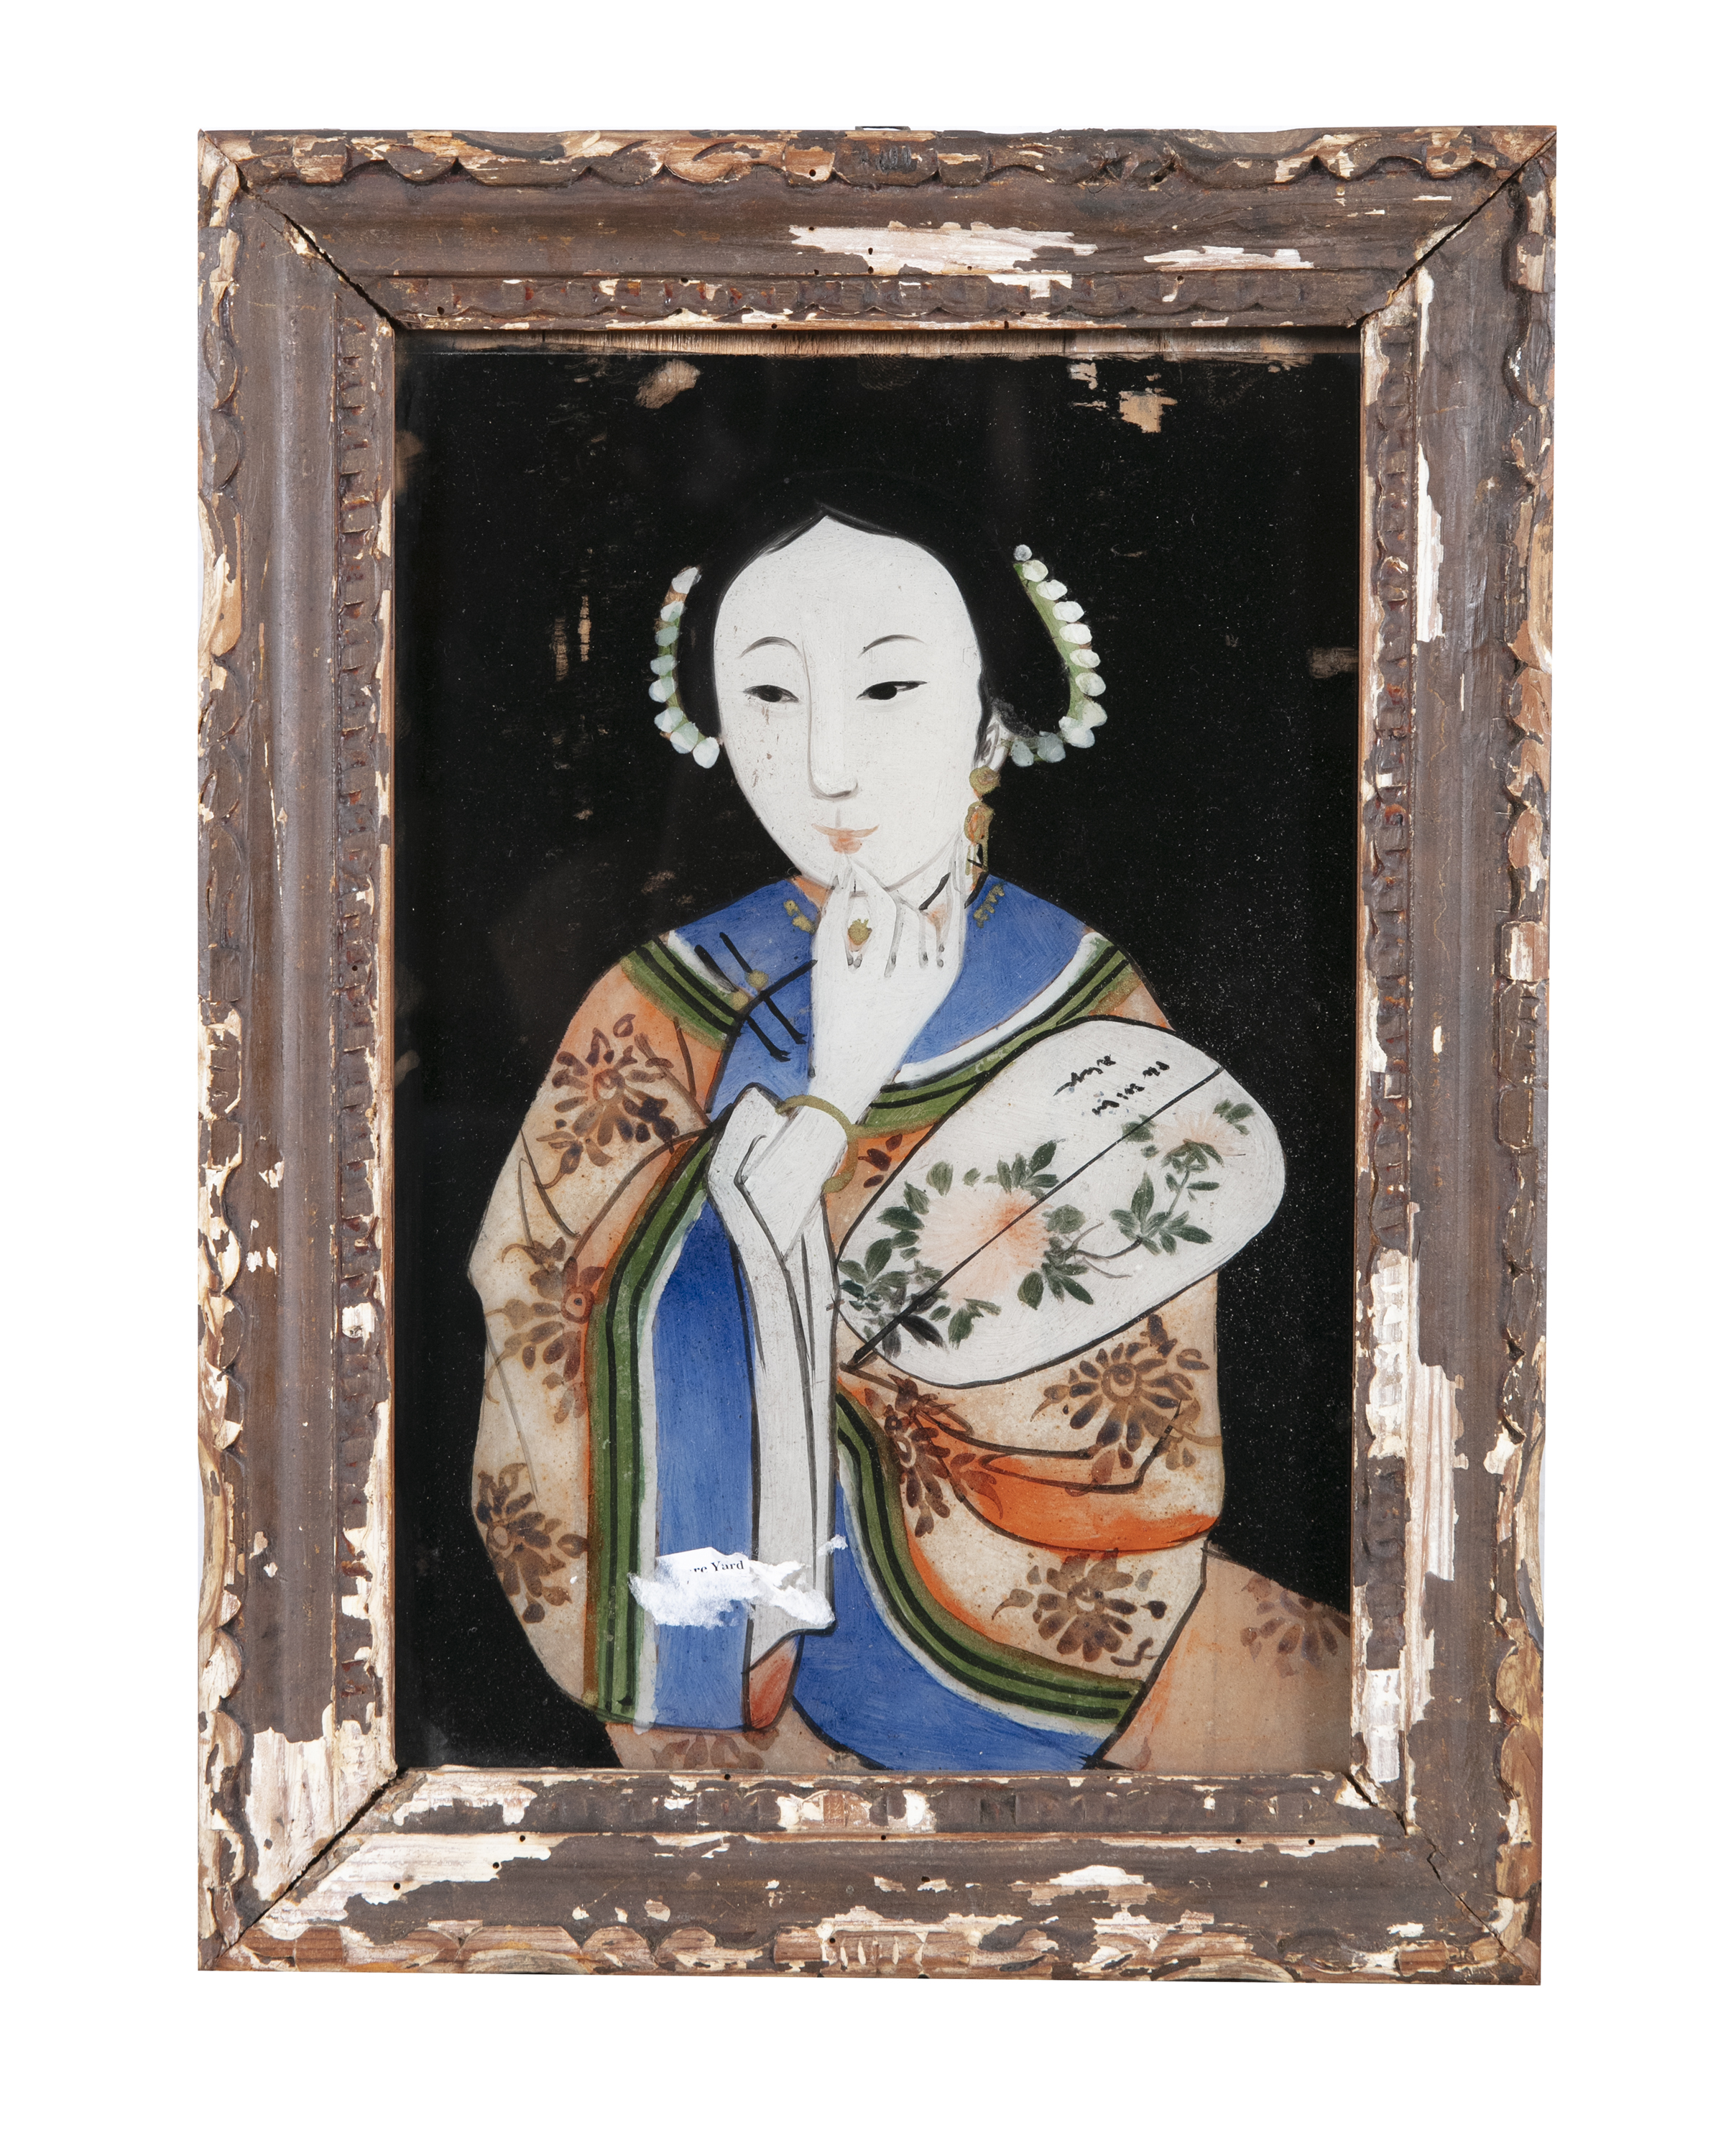 A JAPANESE REVERSE PAINTED GLASS PANEL OF A GEISHA GIRL, three-quarter length, depicted clutching